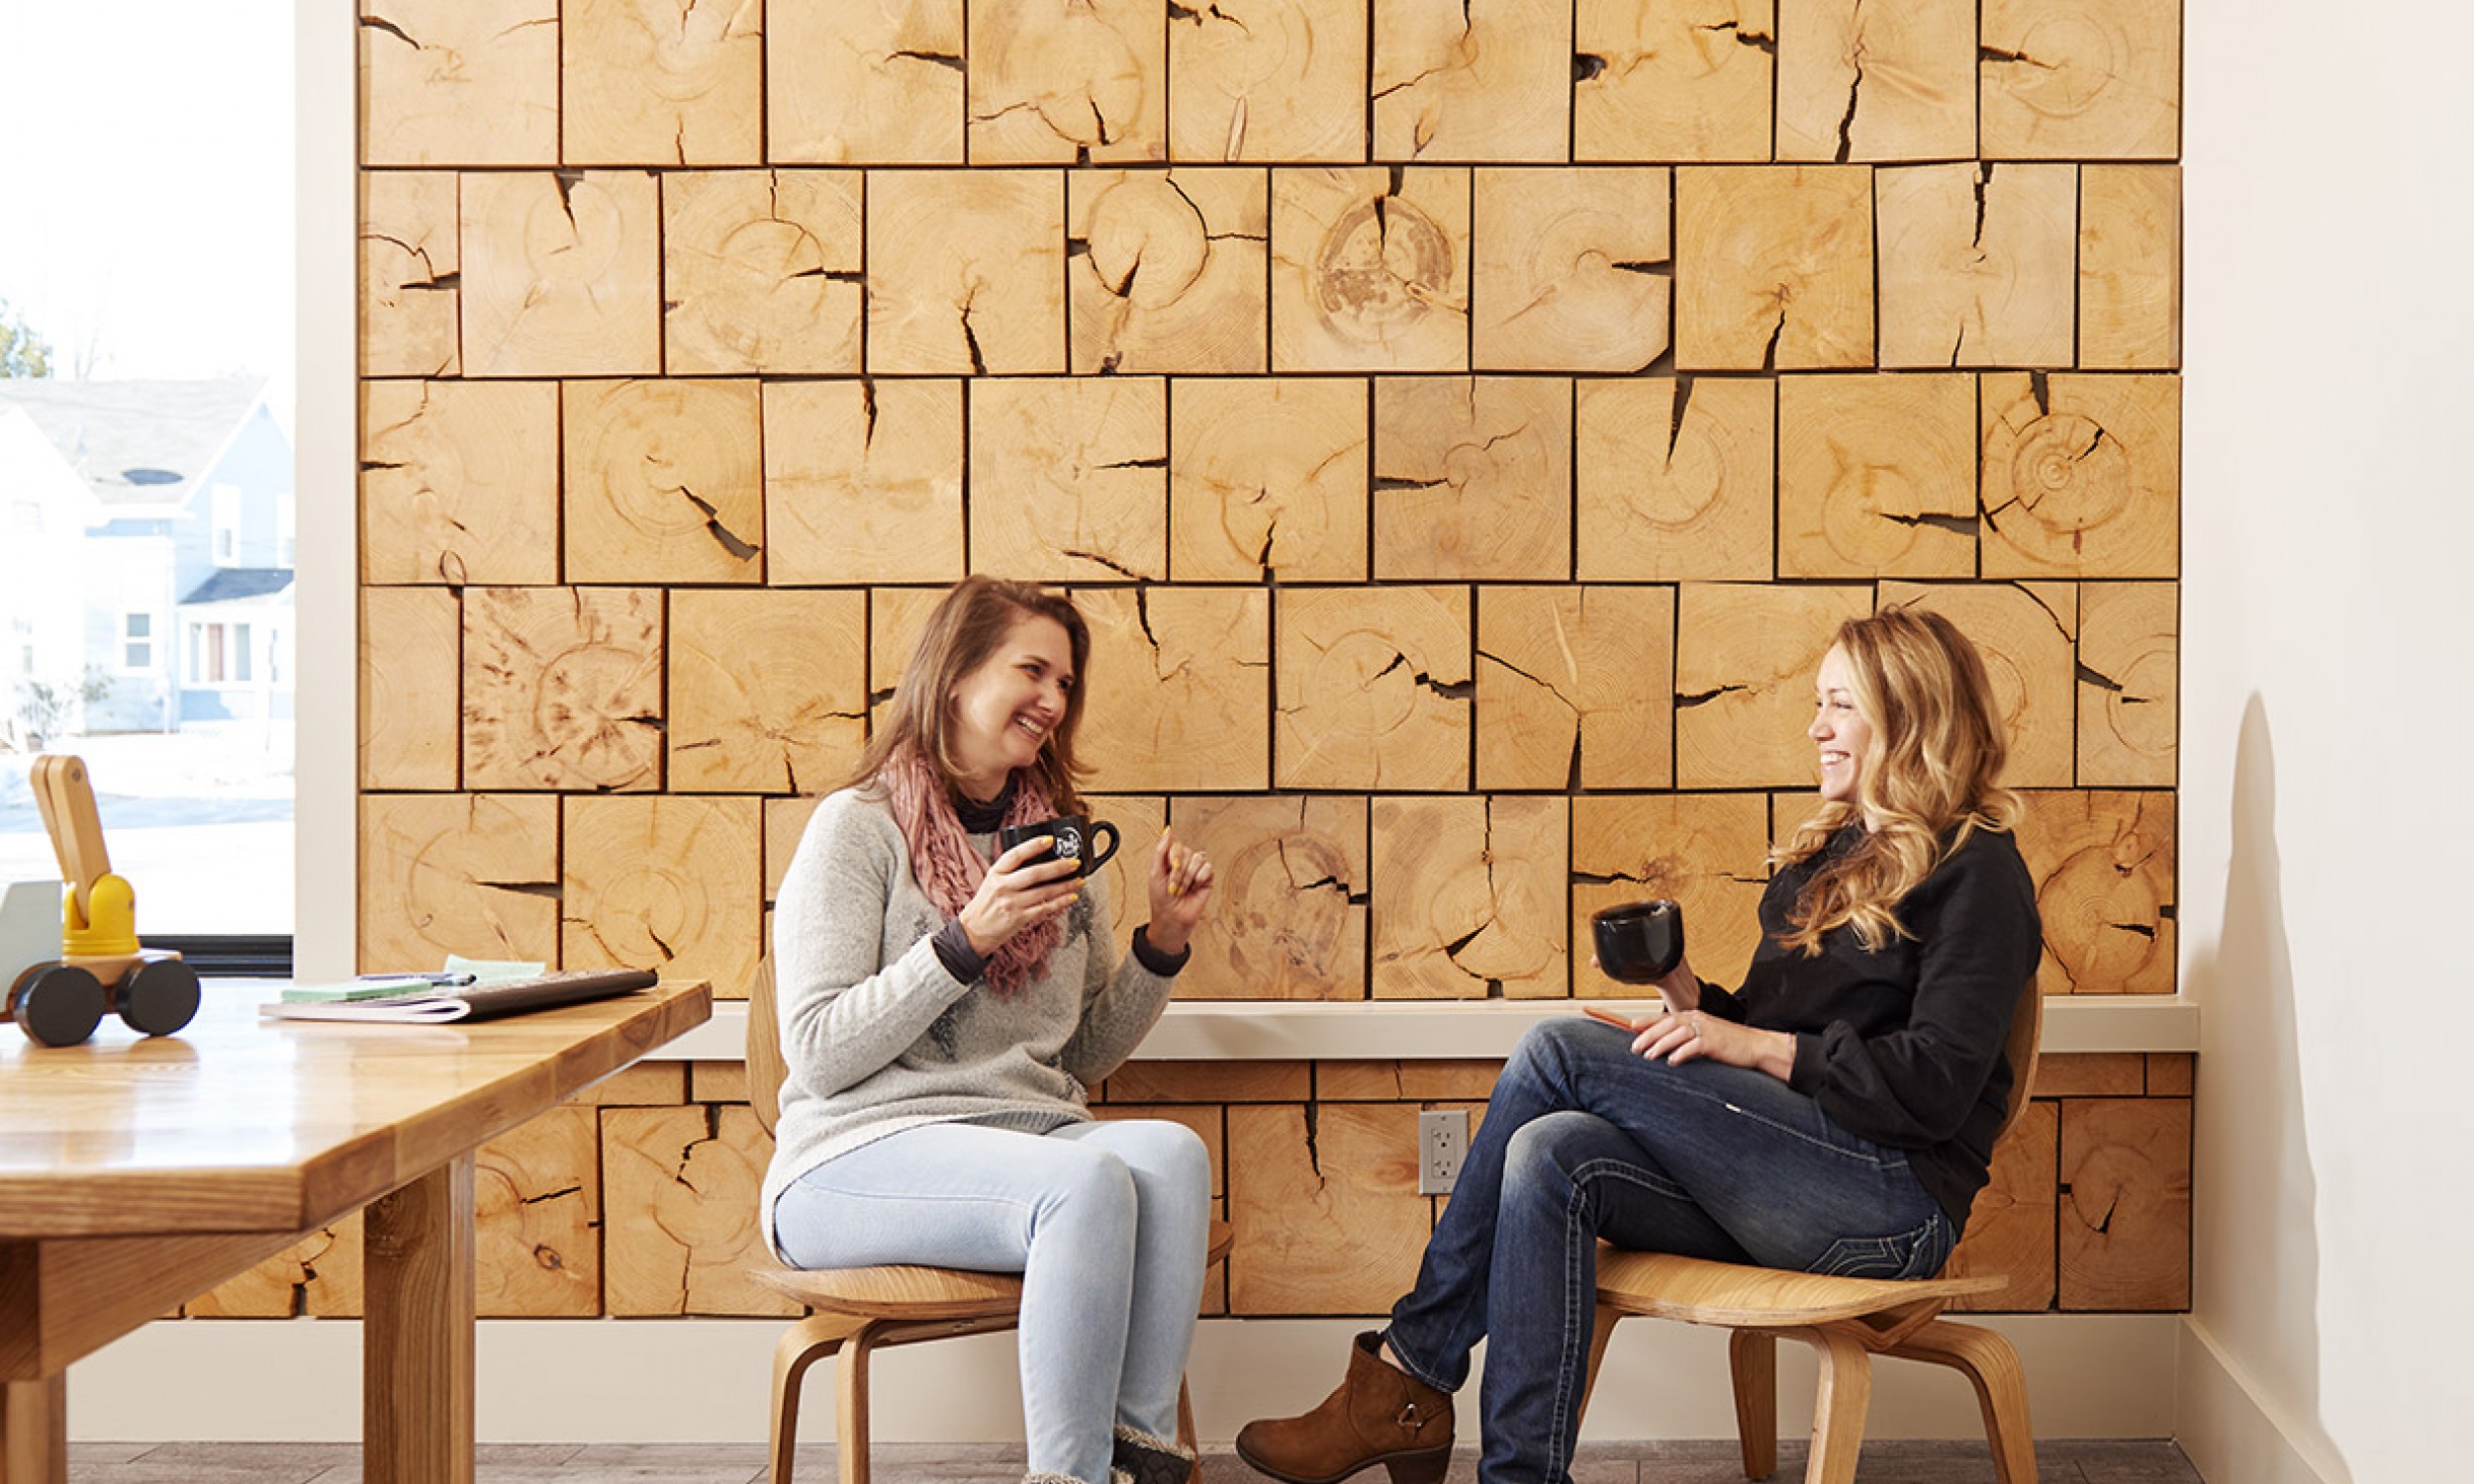 Wood wall finish, maine architect, wood wall tiles, casual conversation